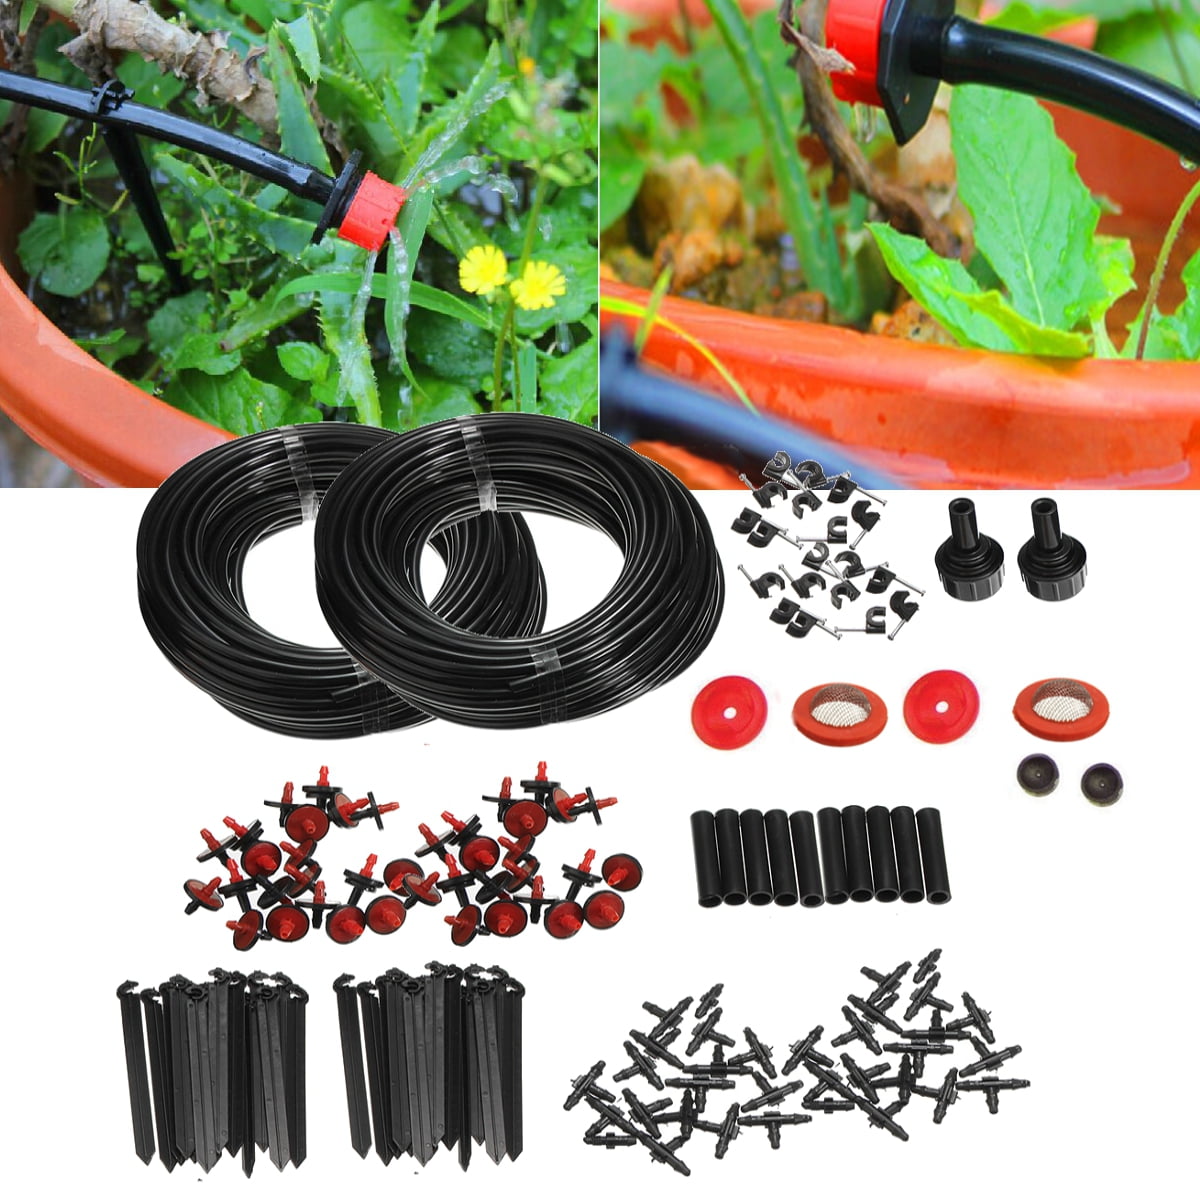 Micro Drip Irrigation Watering Automatic Garden Plant Greenhouse System Set Kit